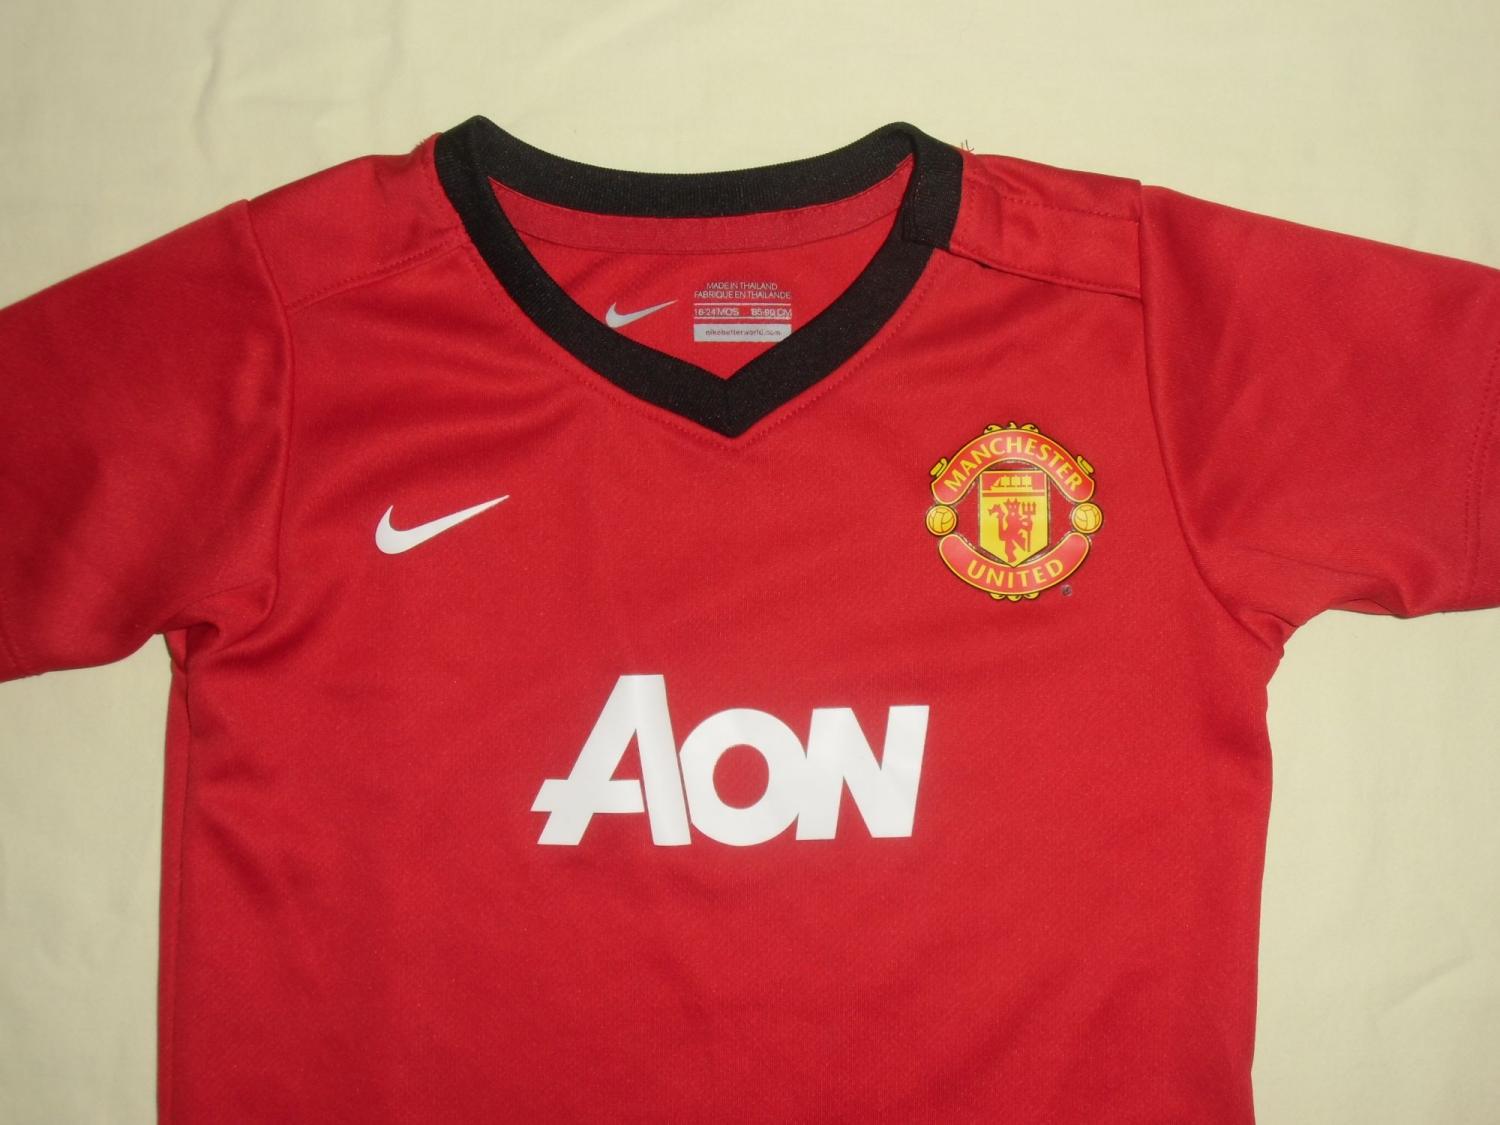 Manchester United Home football shirt 2012 - 2013. Sponsored by AON